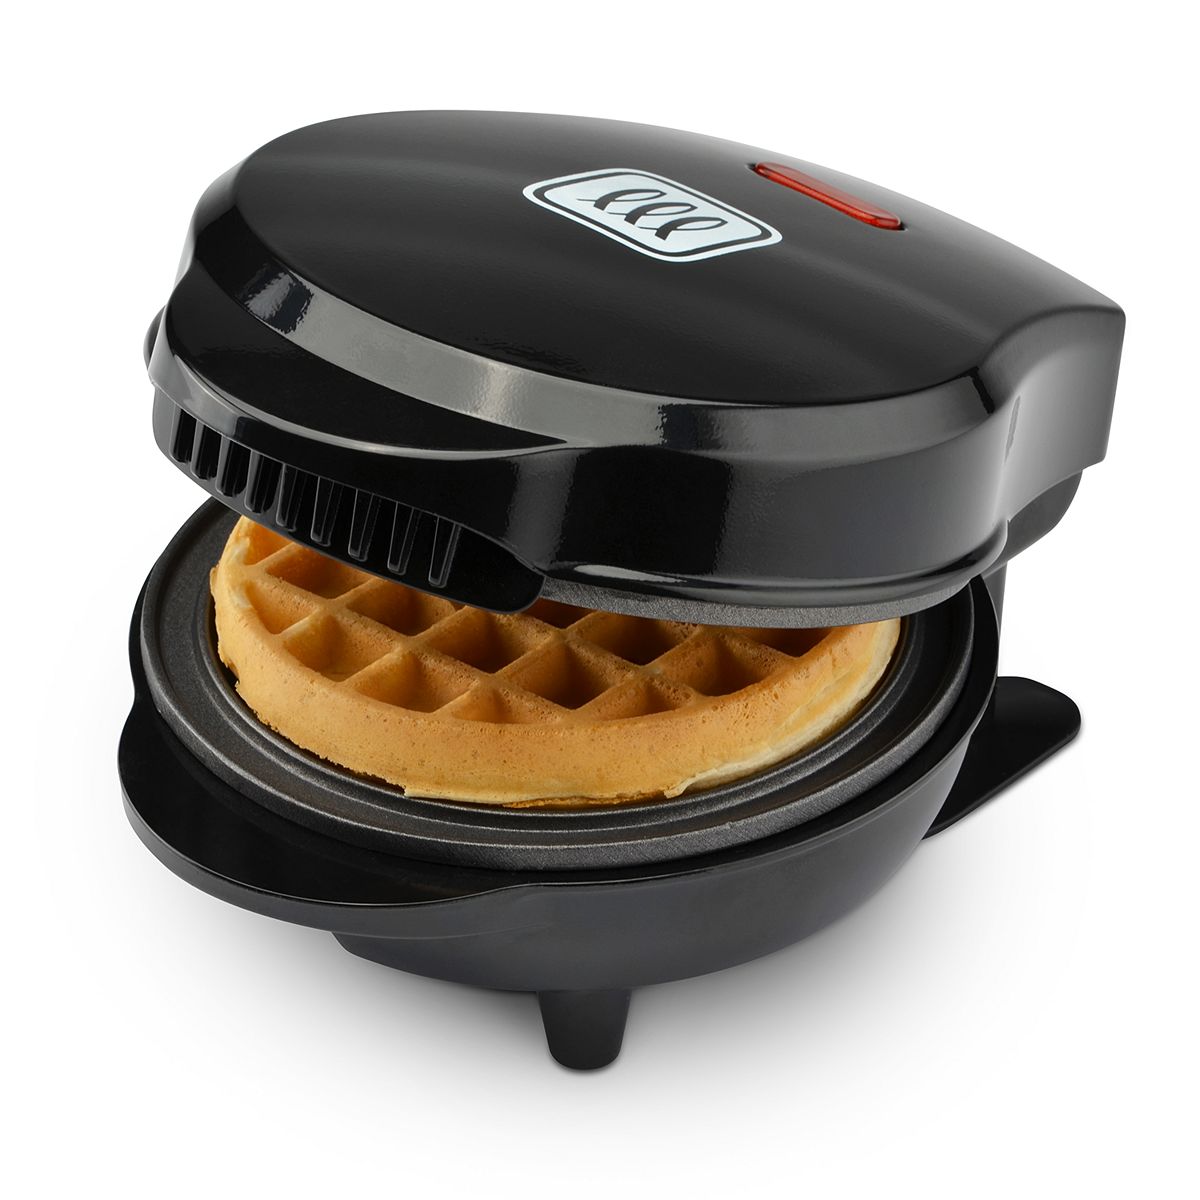 Toastmaster Mini Waffle Maker for $2.14 (After $14 MIR) – dealsfriends